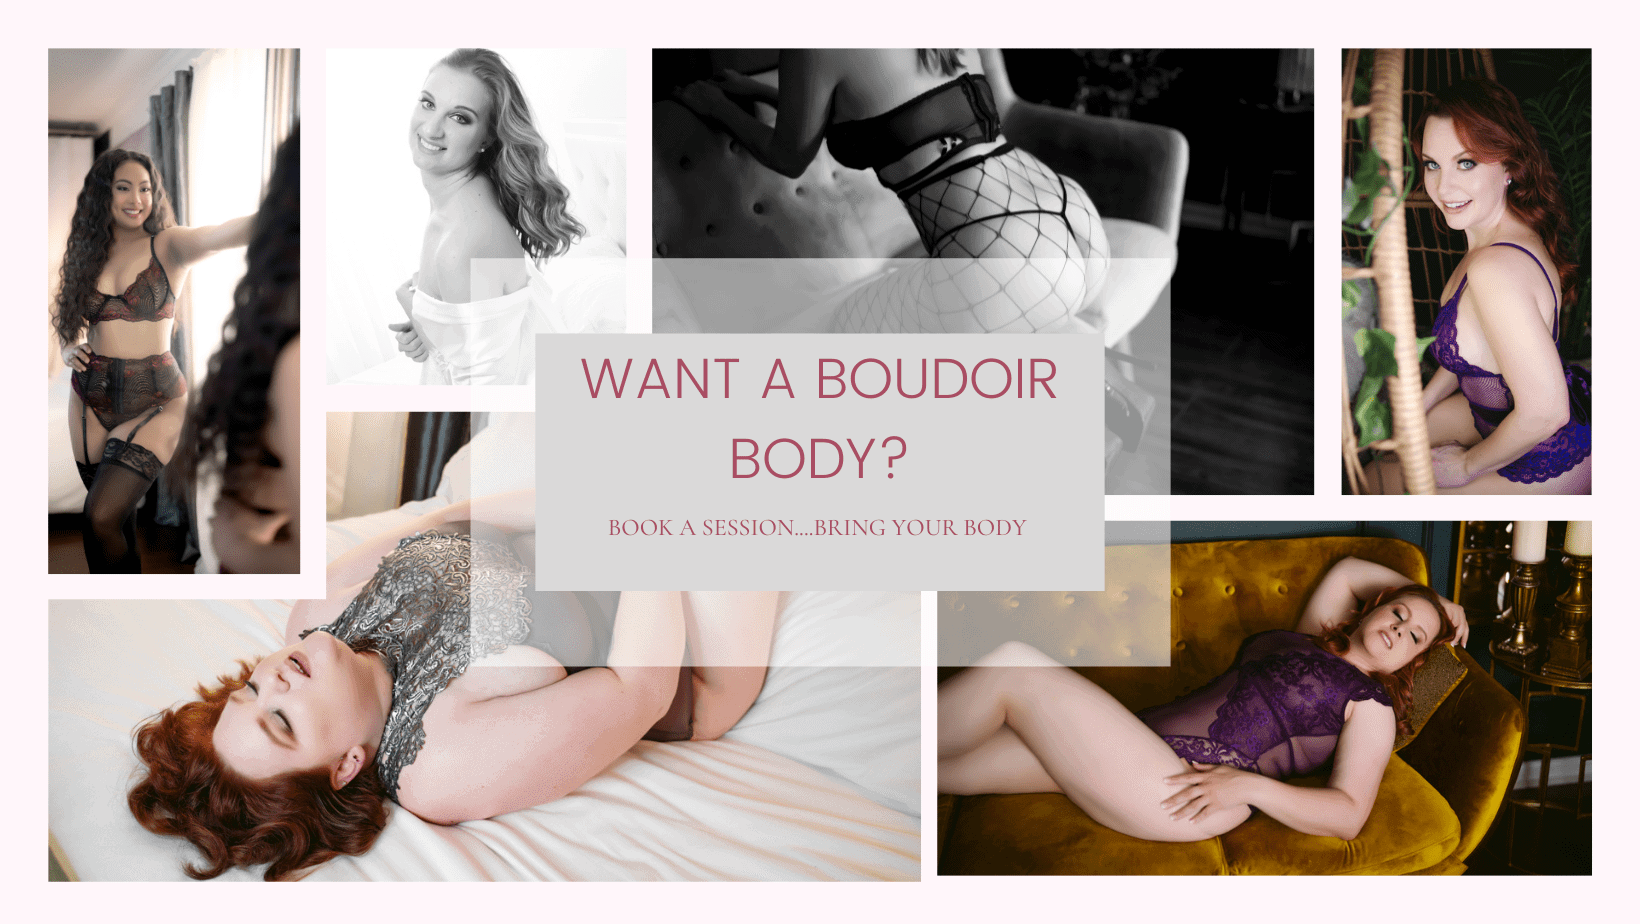 BOUDOIR photo collage with message want a boudoir body then book a session and bring your body